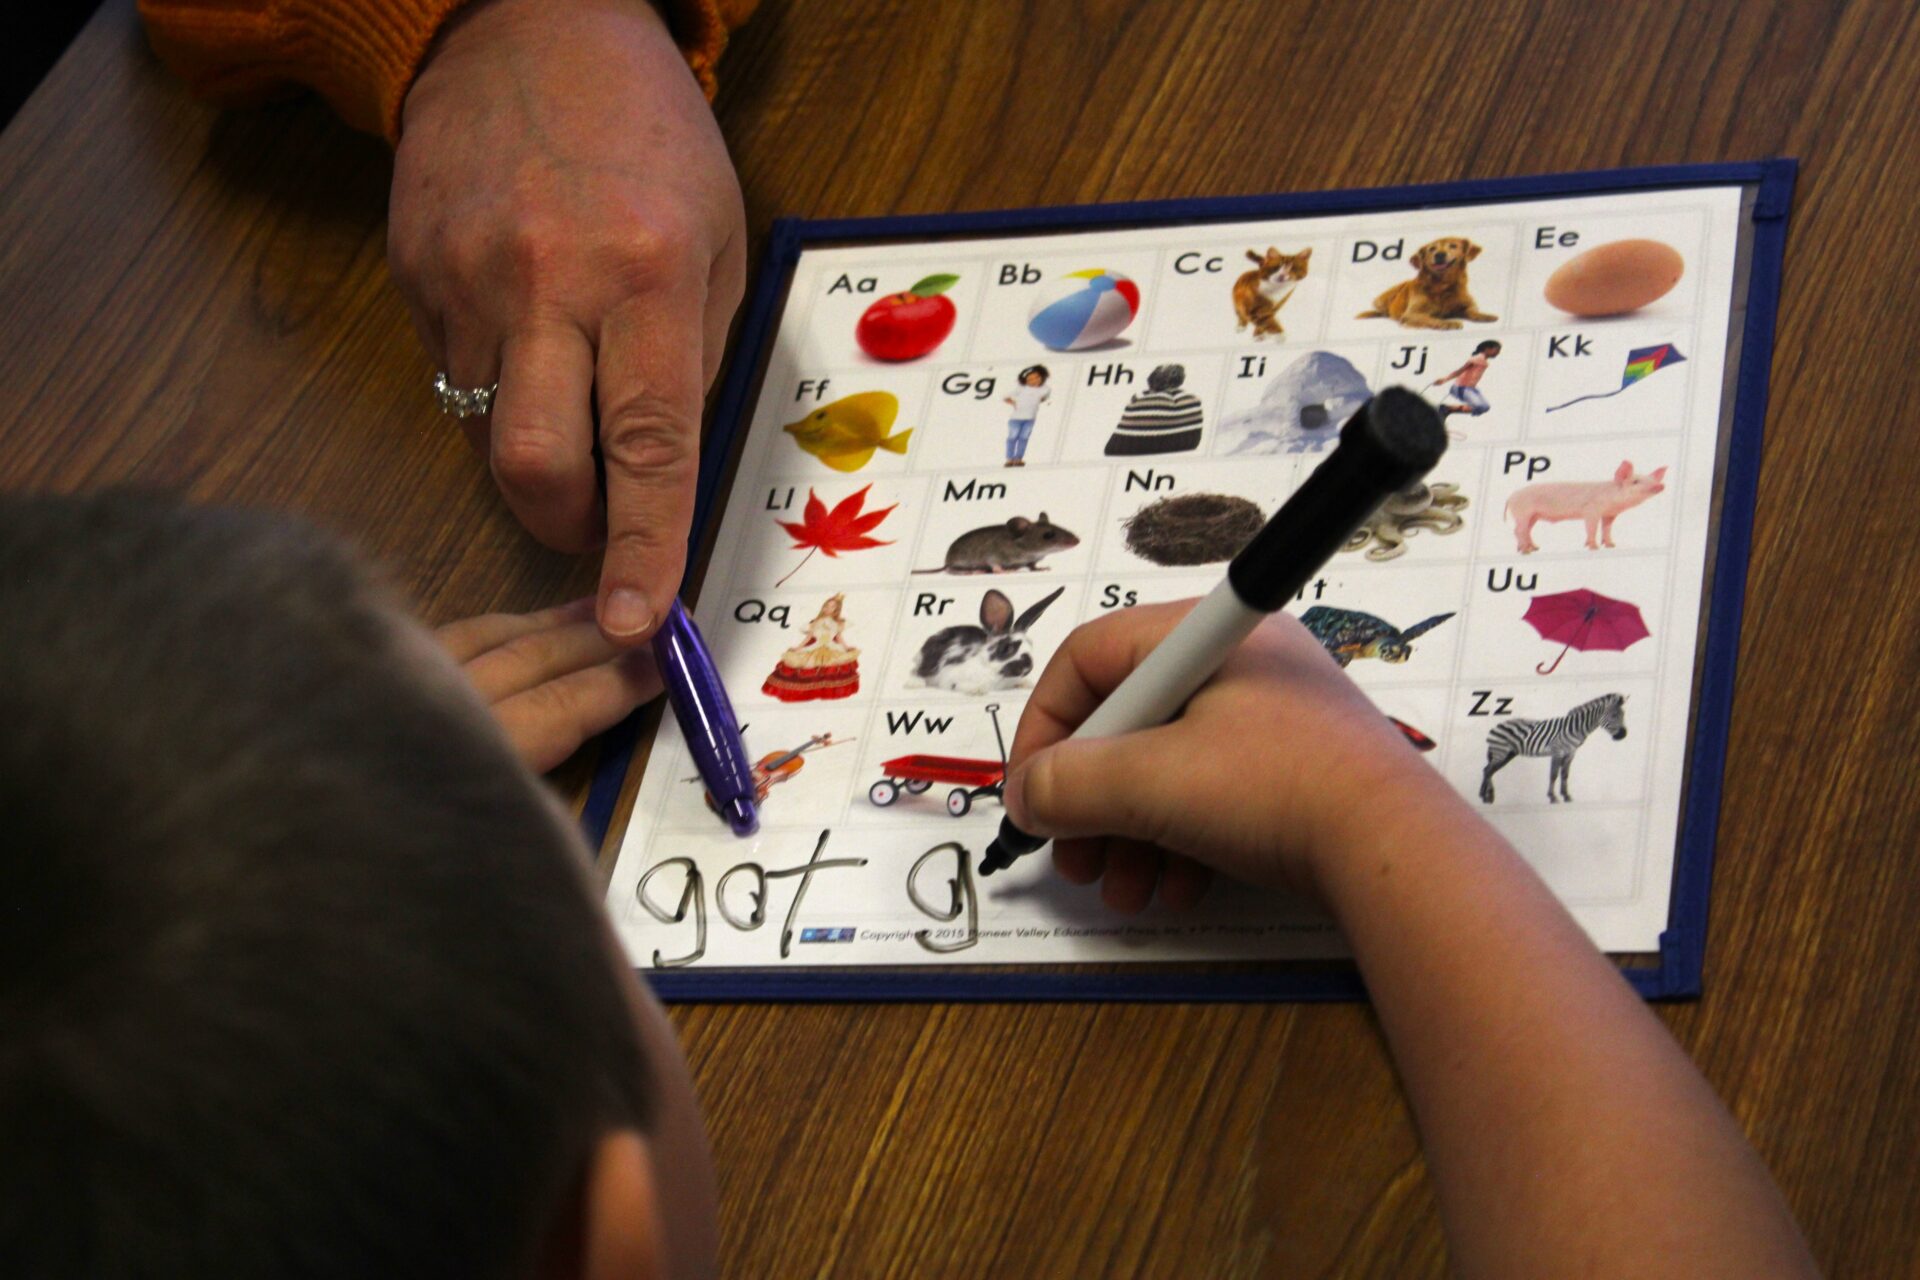 An adult hand indicates a letter written by a student on a letter/image board. The child can be seen holding a dry erase marker and writing the word "got" for a second time at the bottom of the board, where short words are paired with simple images. The entire vignette is seen over the child's shoulder.